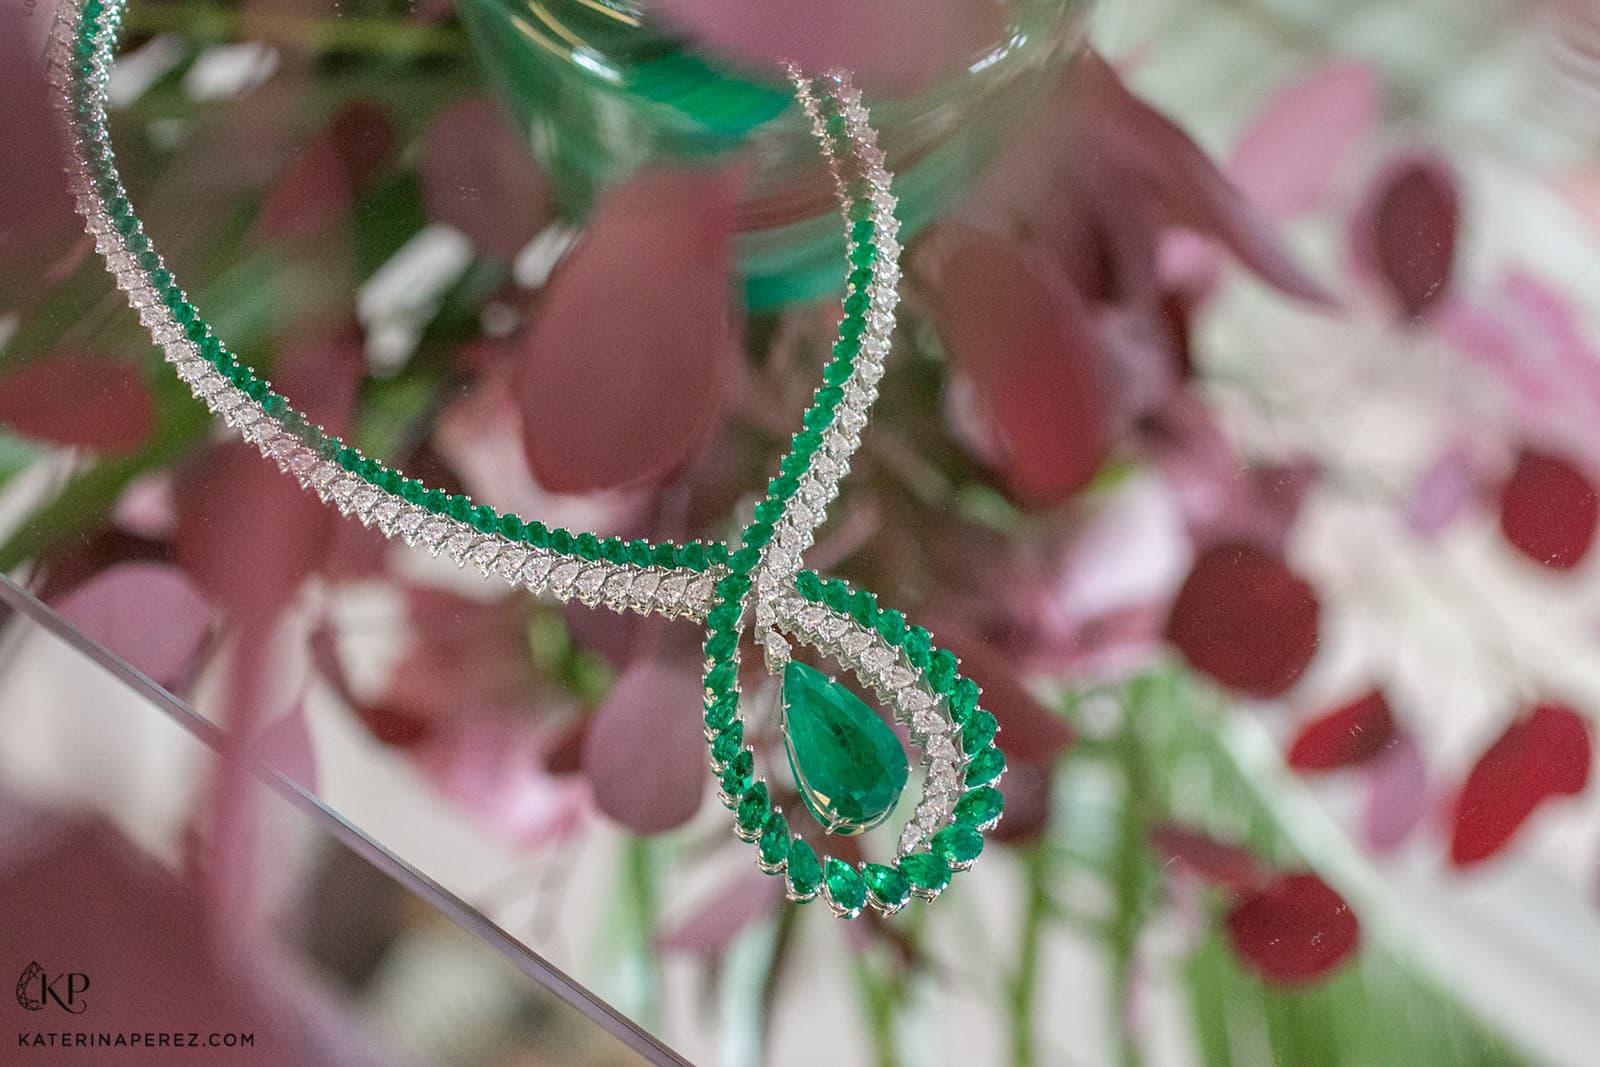 Chopard Red Carpet 2019 collection necklace with pear cut emeralds and diamonds